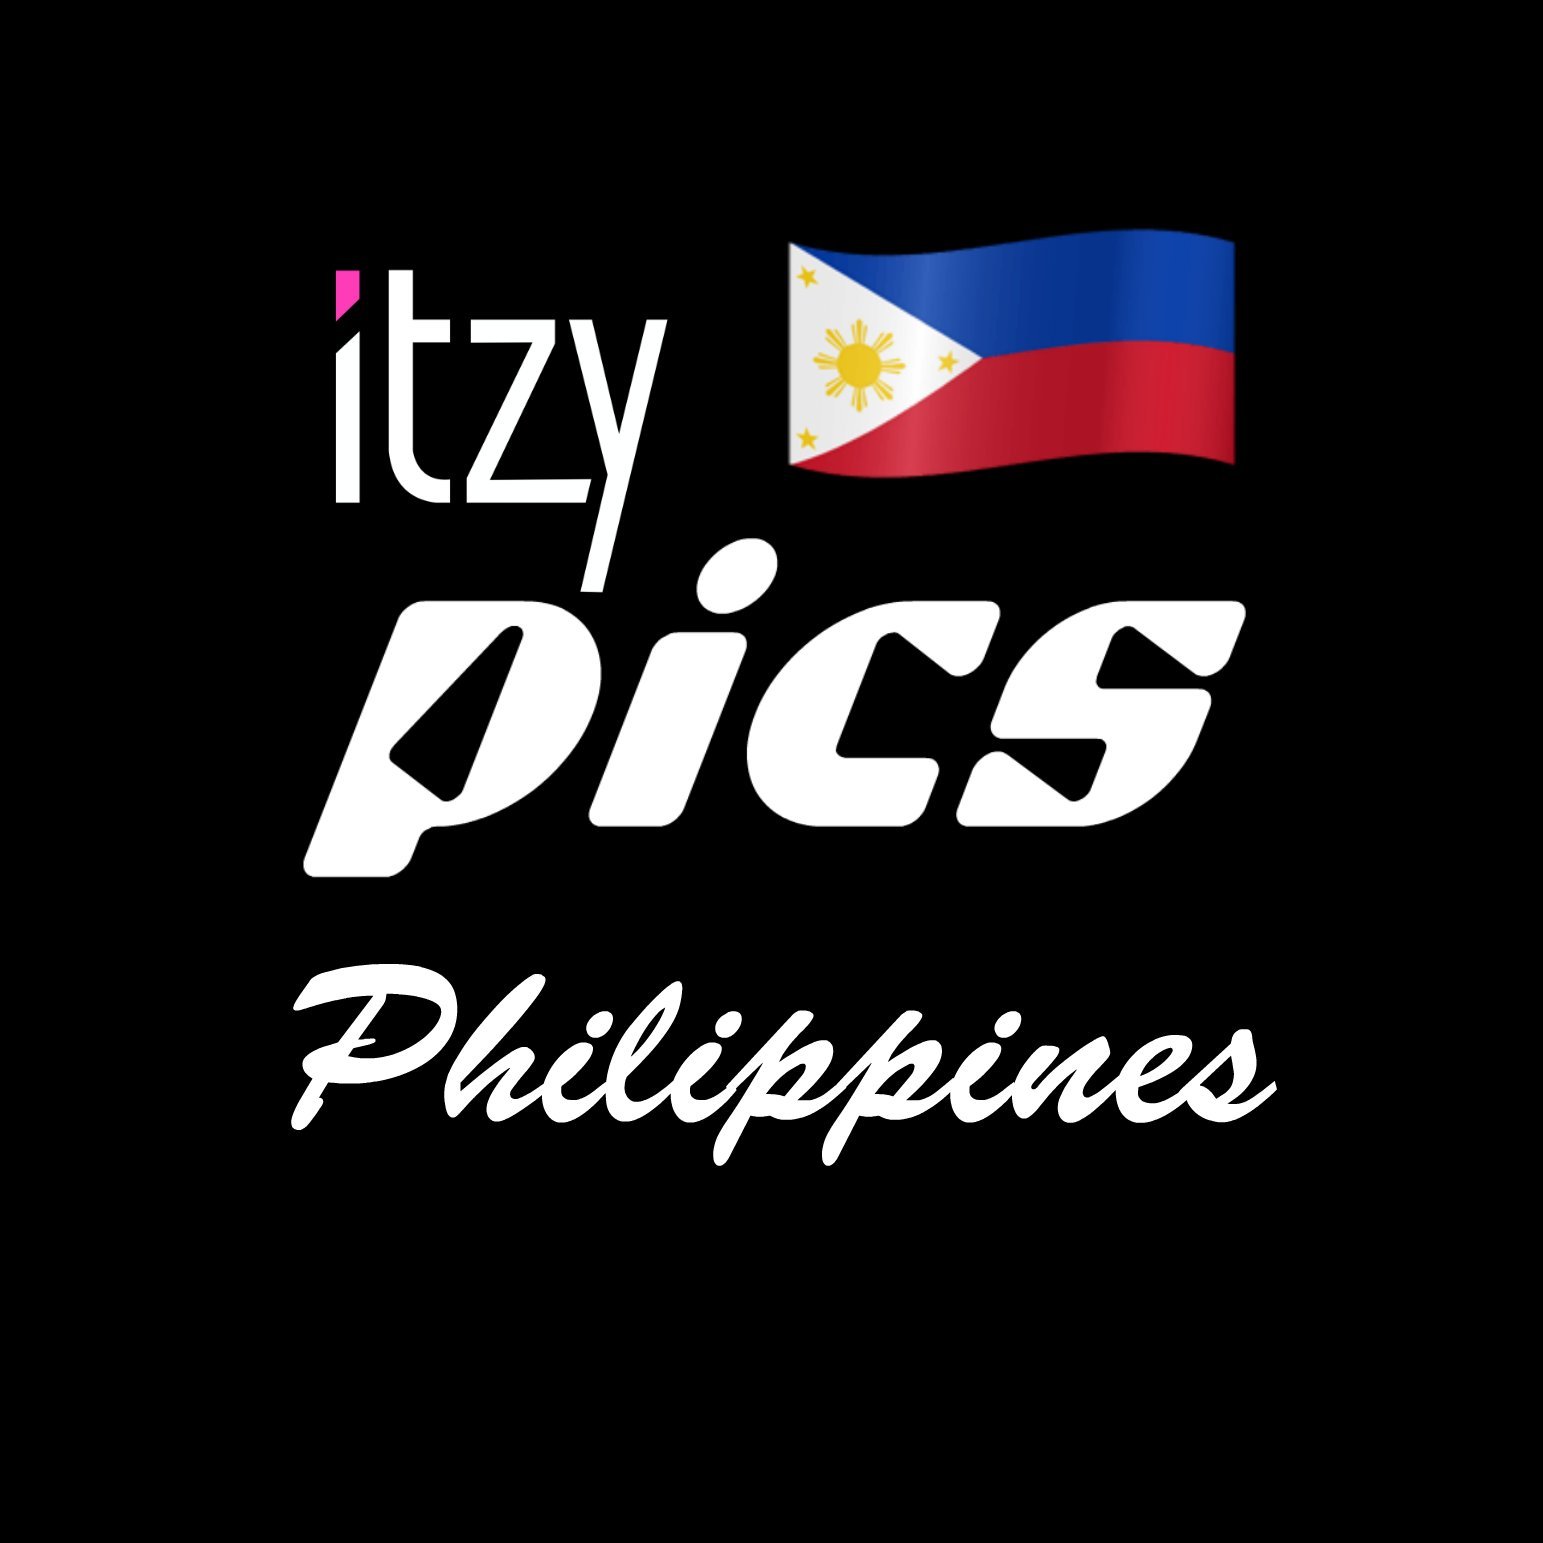 ITZY 있지 Pics PHILIPPINES. We are here to give you their best picture. Together or single. 
Yeji 
Lia
Ryujin
Chaeryeong
Yuna
#ITZY #있지